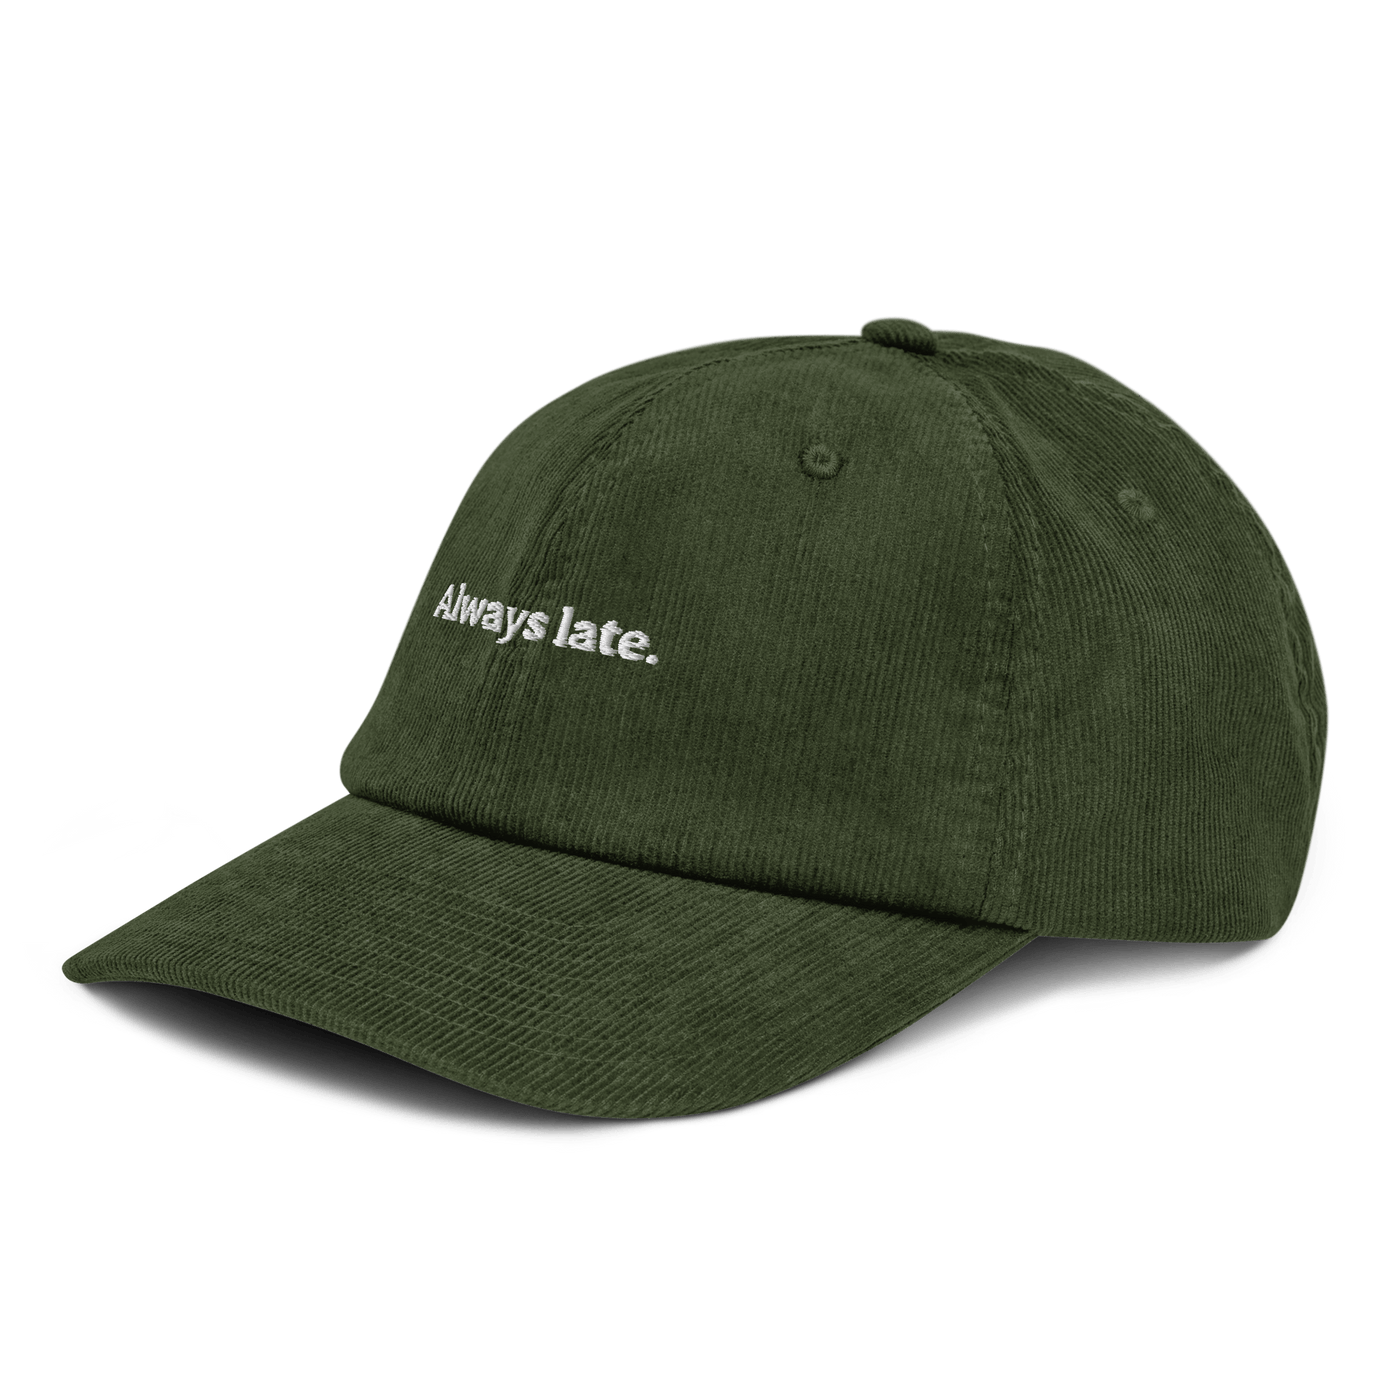 Always Late. Corduroy hat - Dark Olive - - Just Another Cap Store